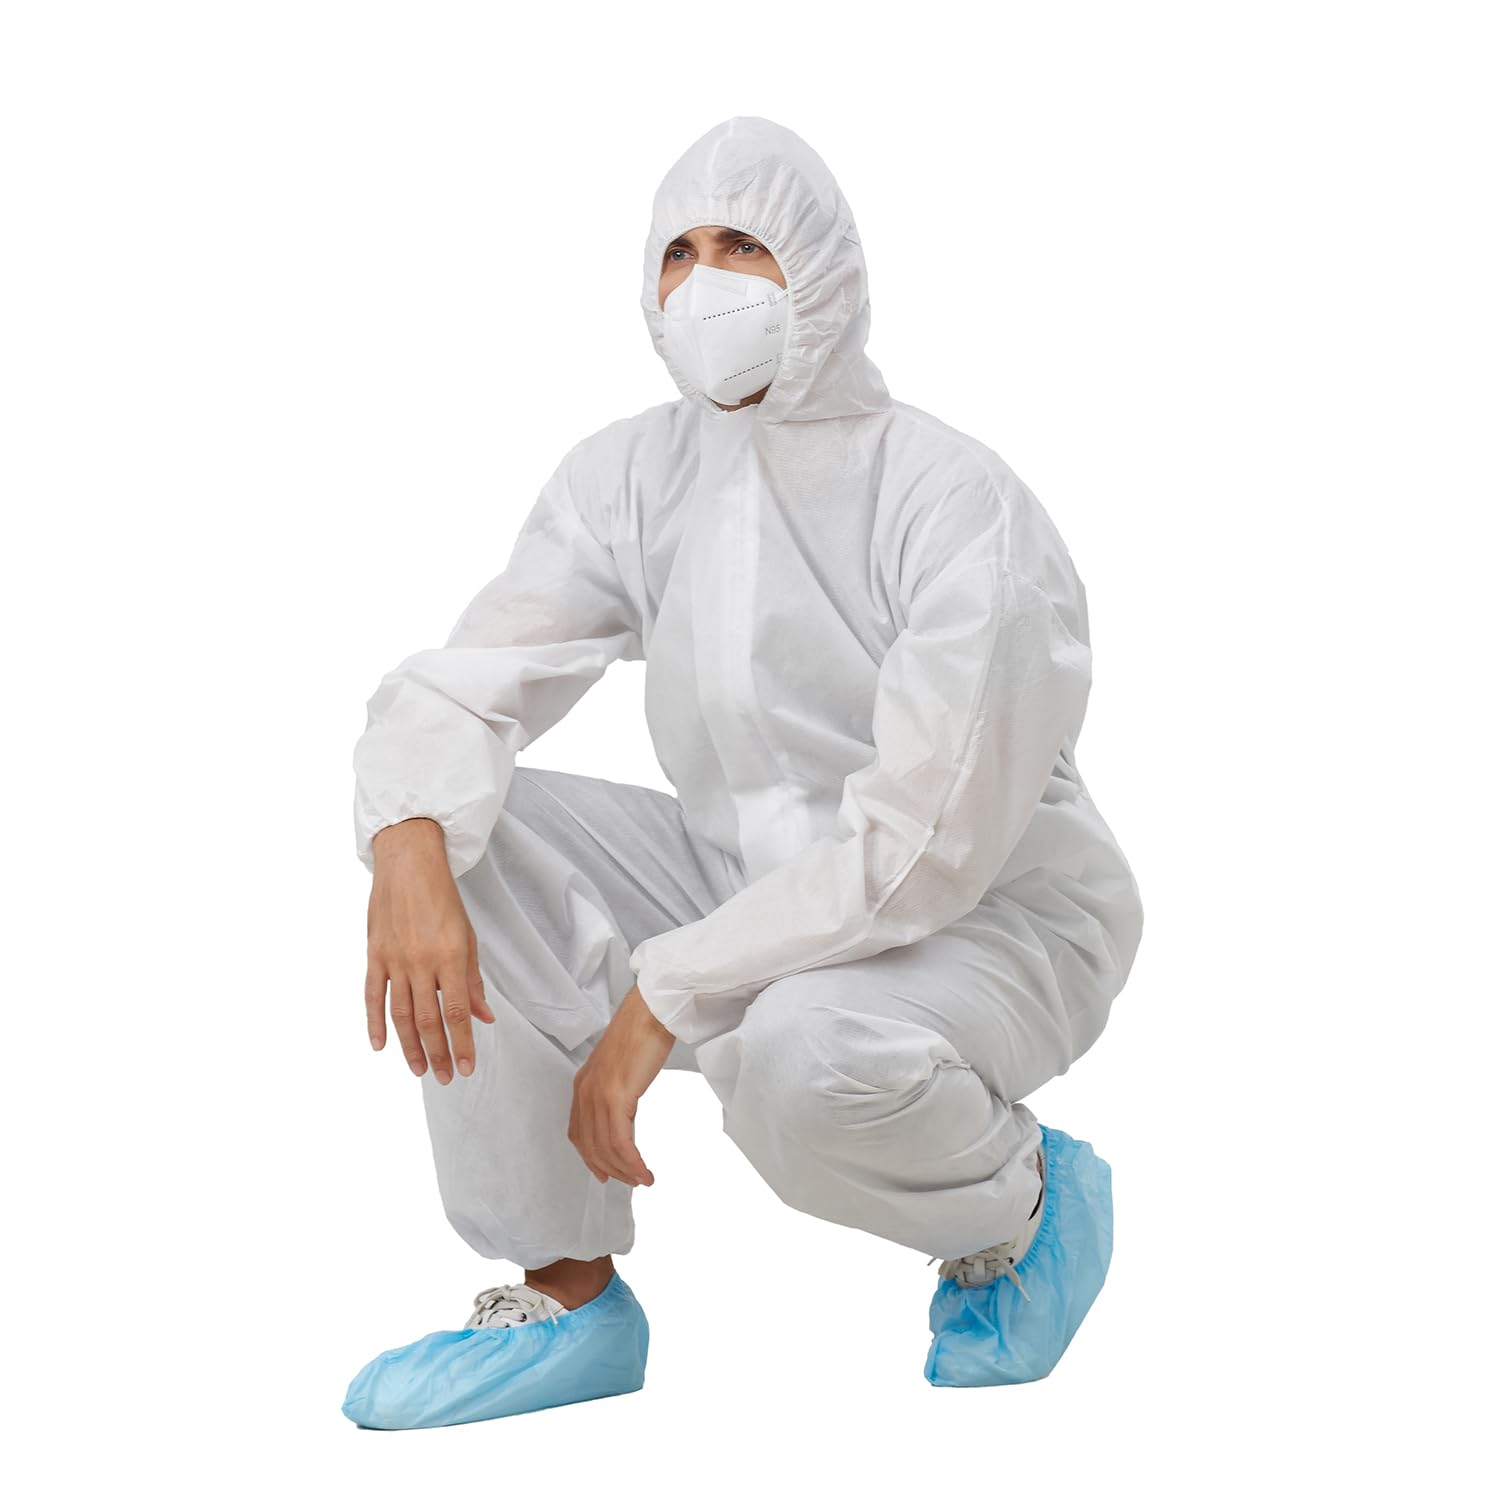 Greenour Hazmat Suits Pack of 12 Disposable Coveralls with Hood Breathable White SMS Painters Suit (X-Large)